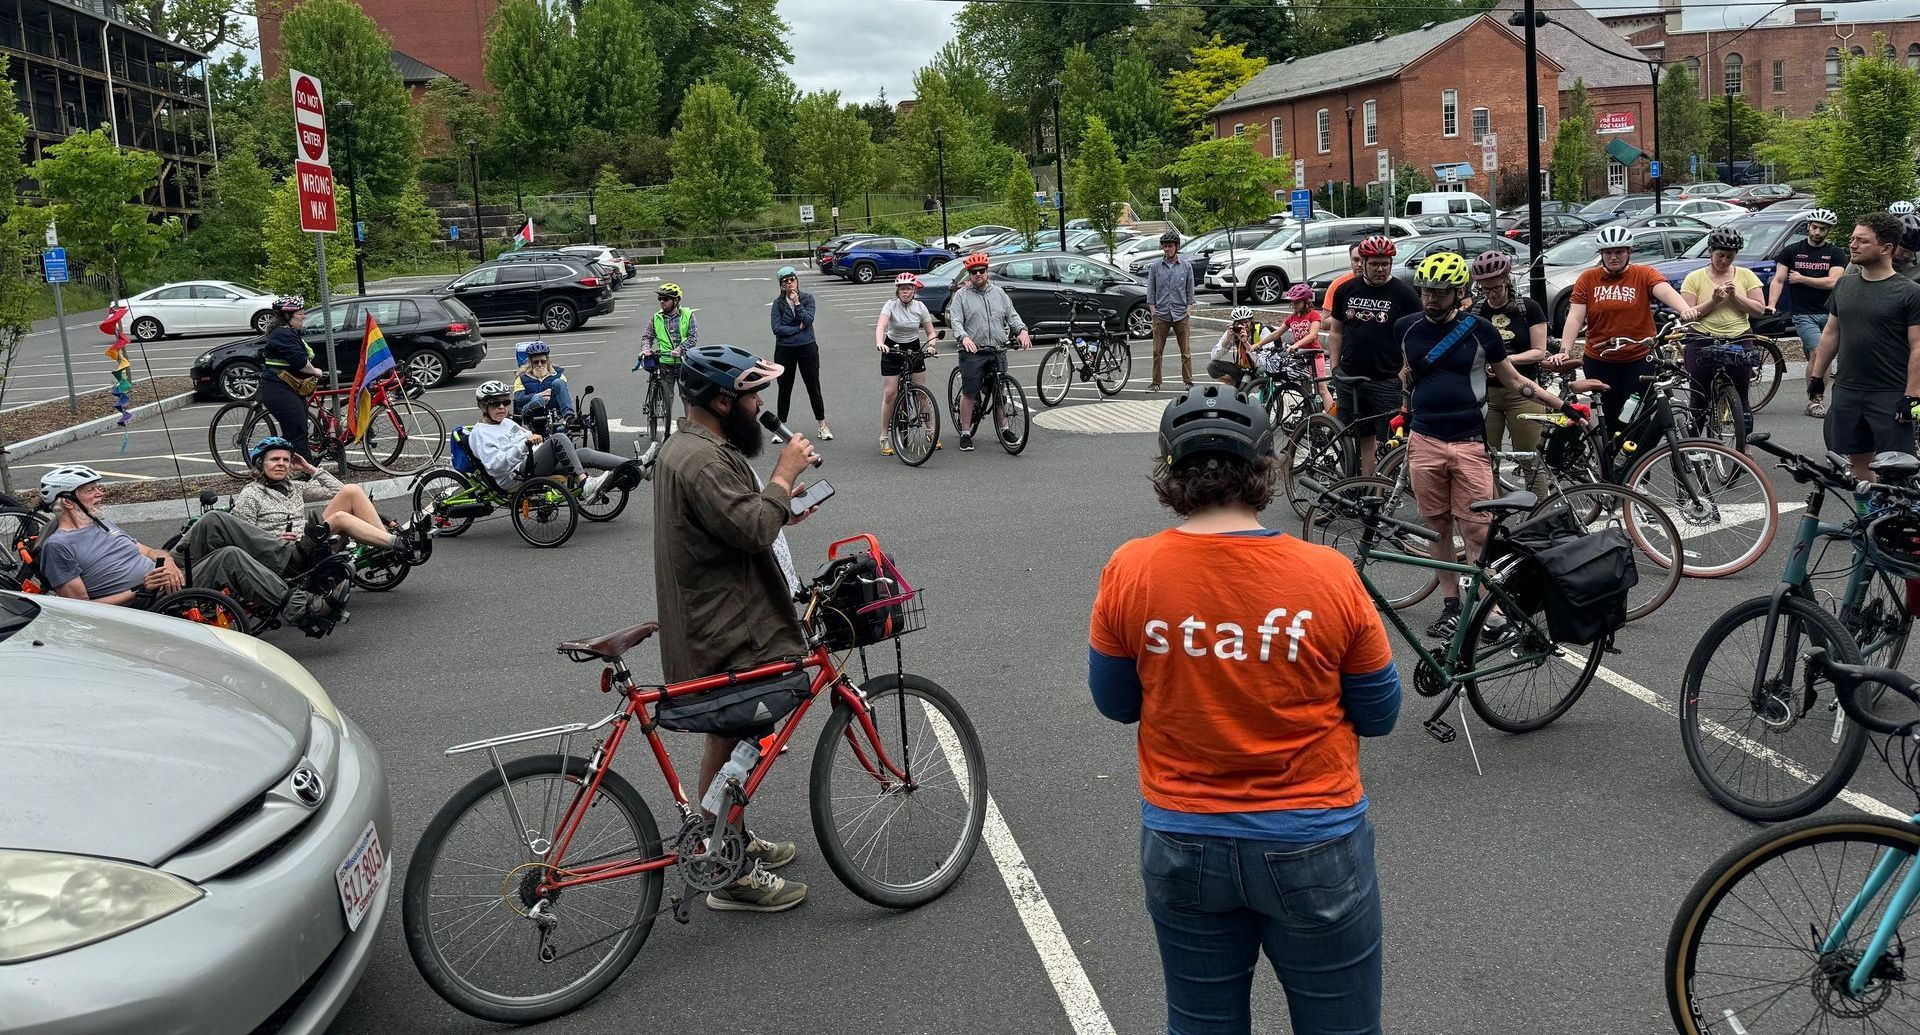 An All Out Adventures program leader holds a clipboard while another leader gives instructions to a large group of cyclists